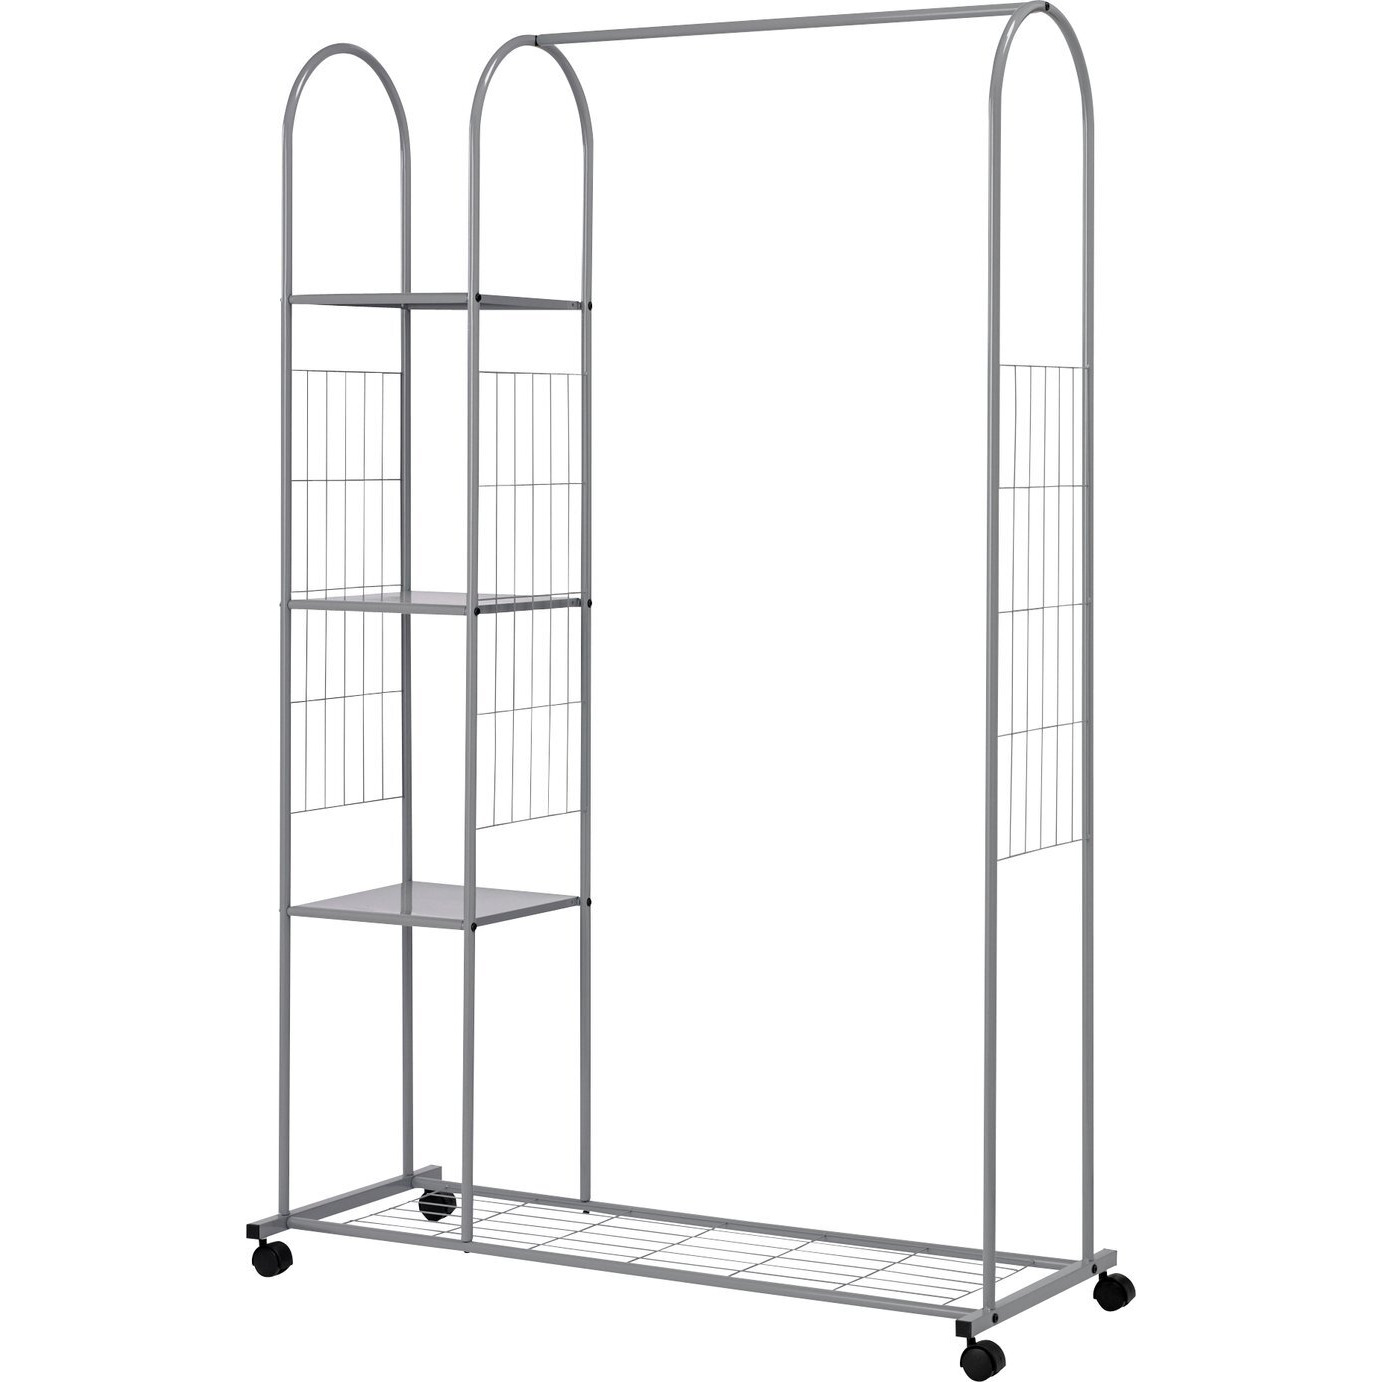 Argos Home Clothes Rail with Shelves - Silver - image 1